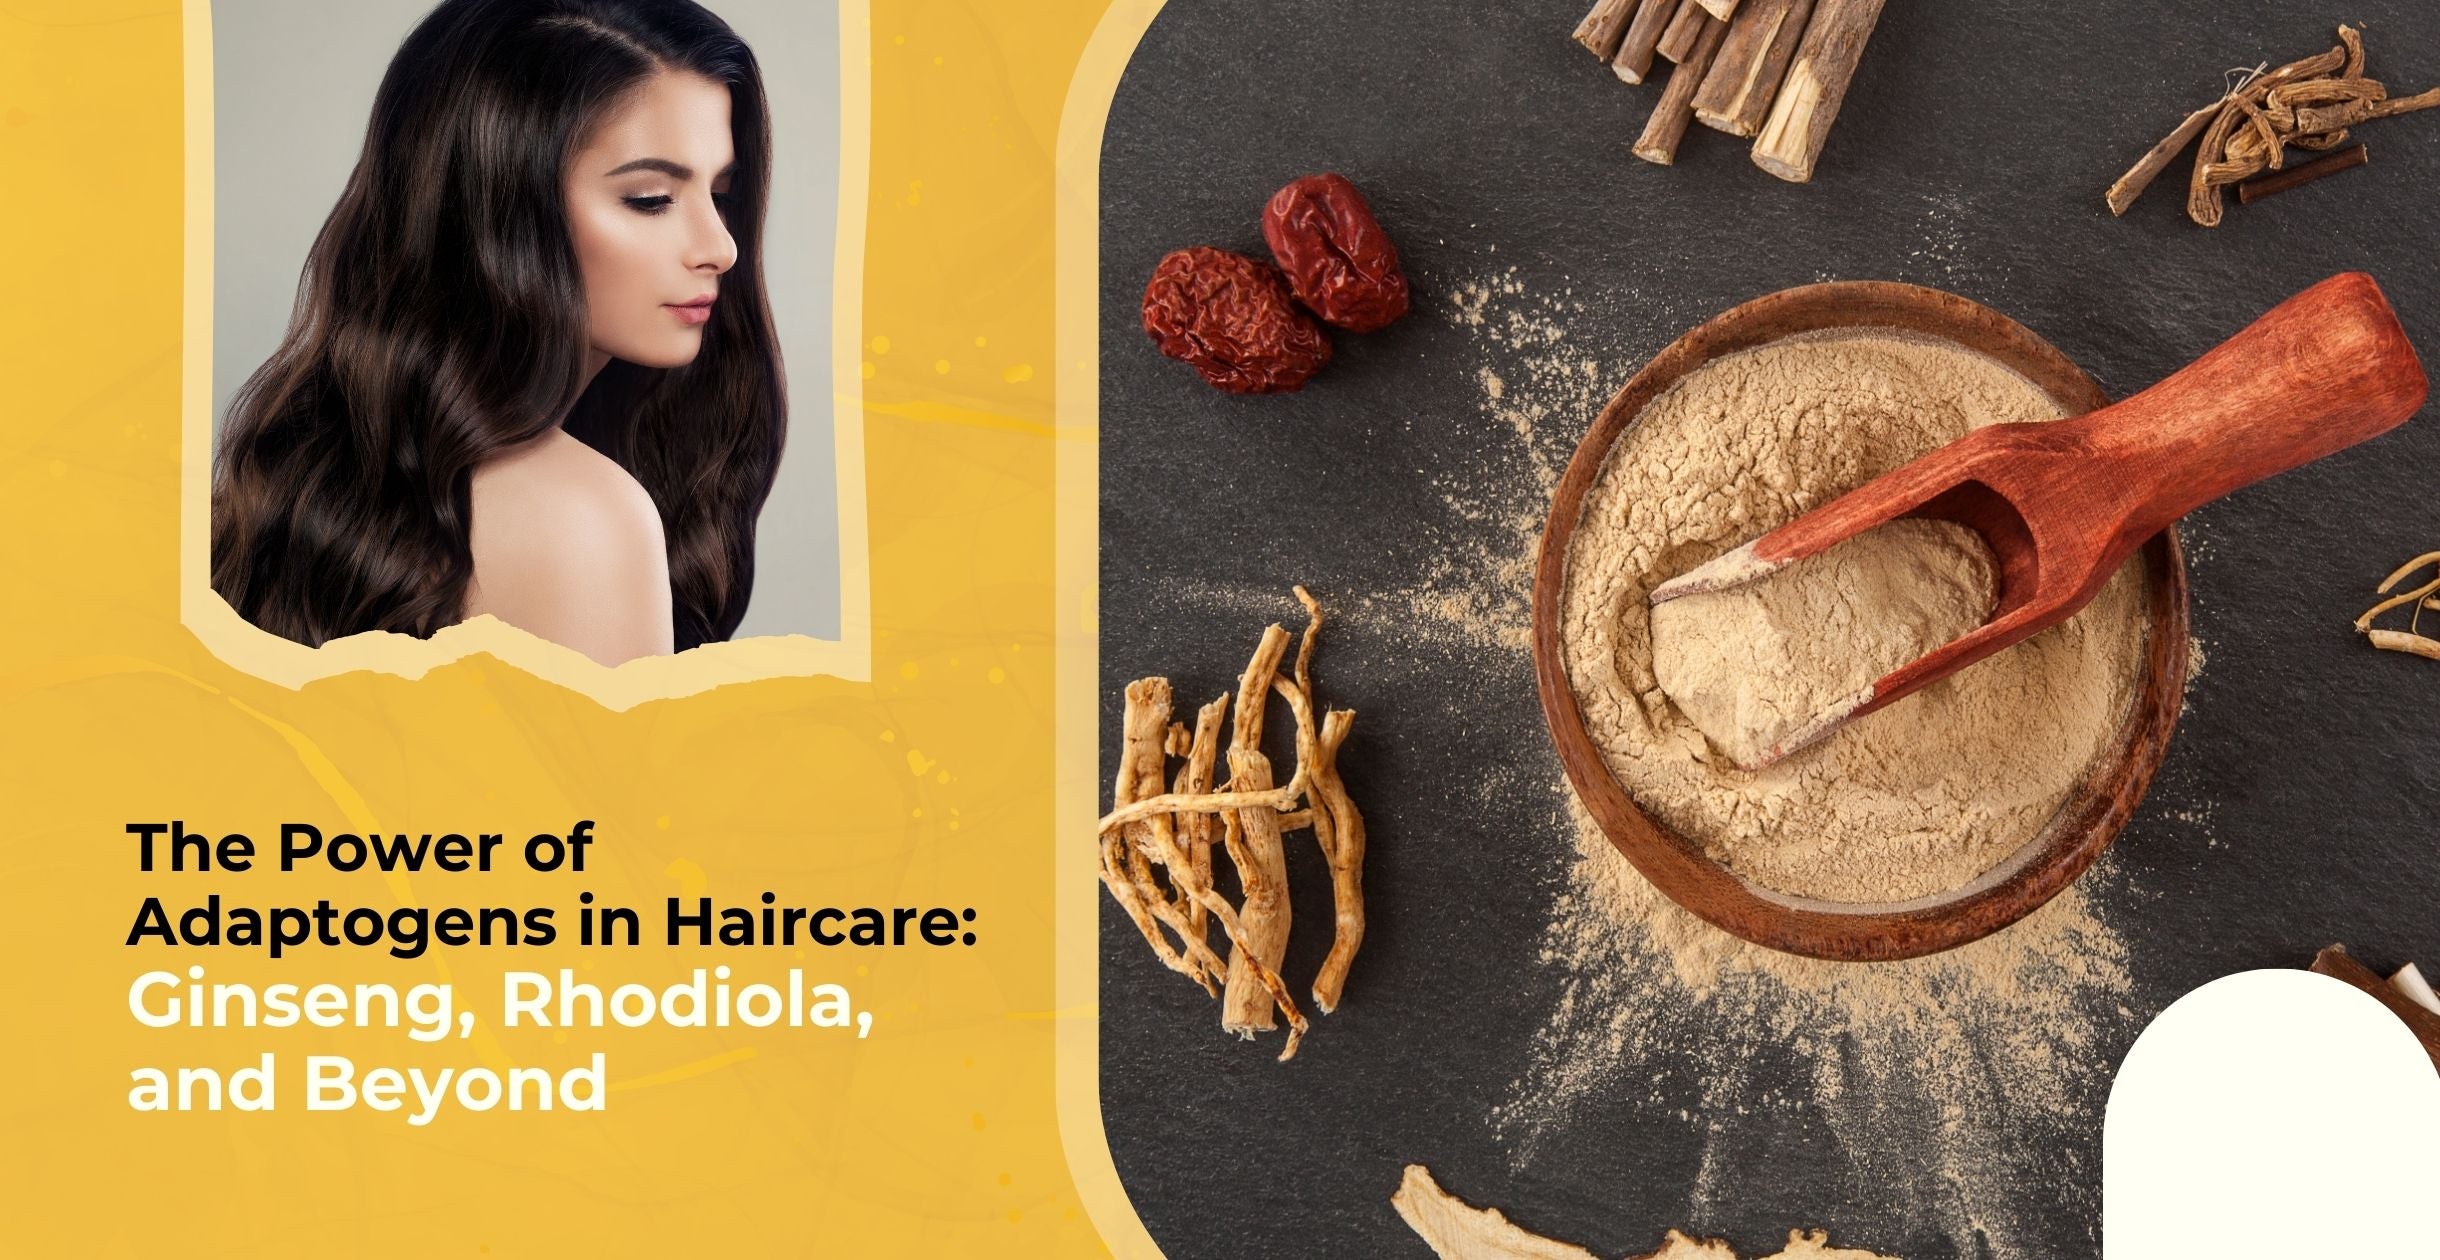 The Power of Adaptogens in Haircare: Ginseng, Rhodiola, and Beyond